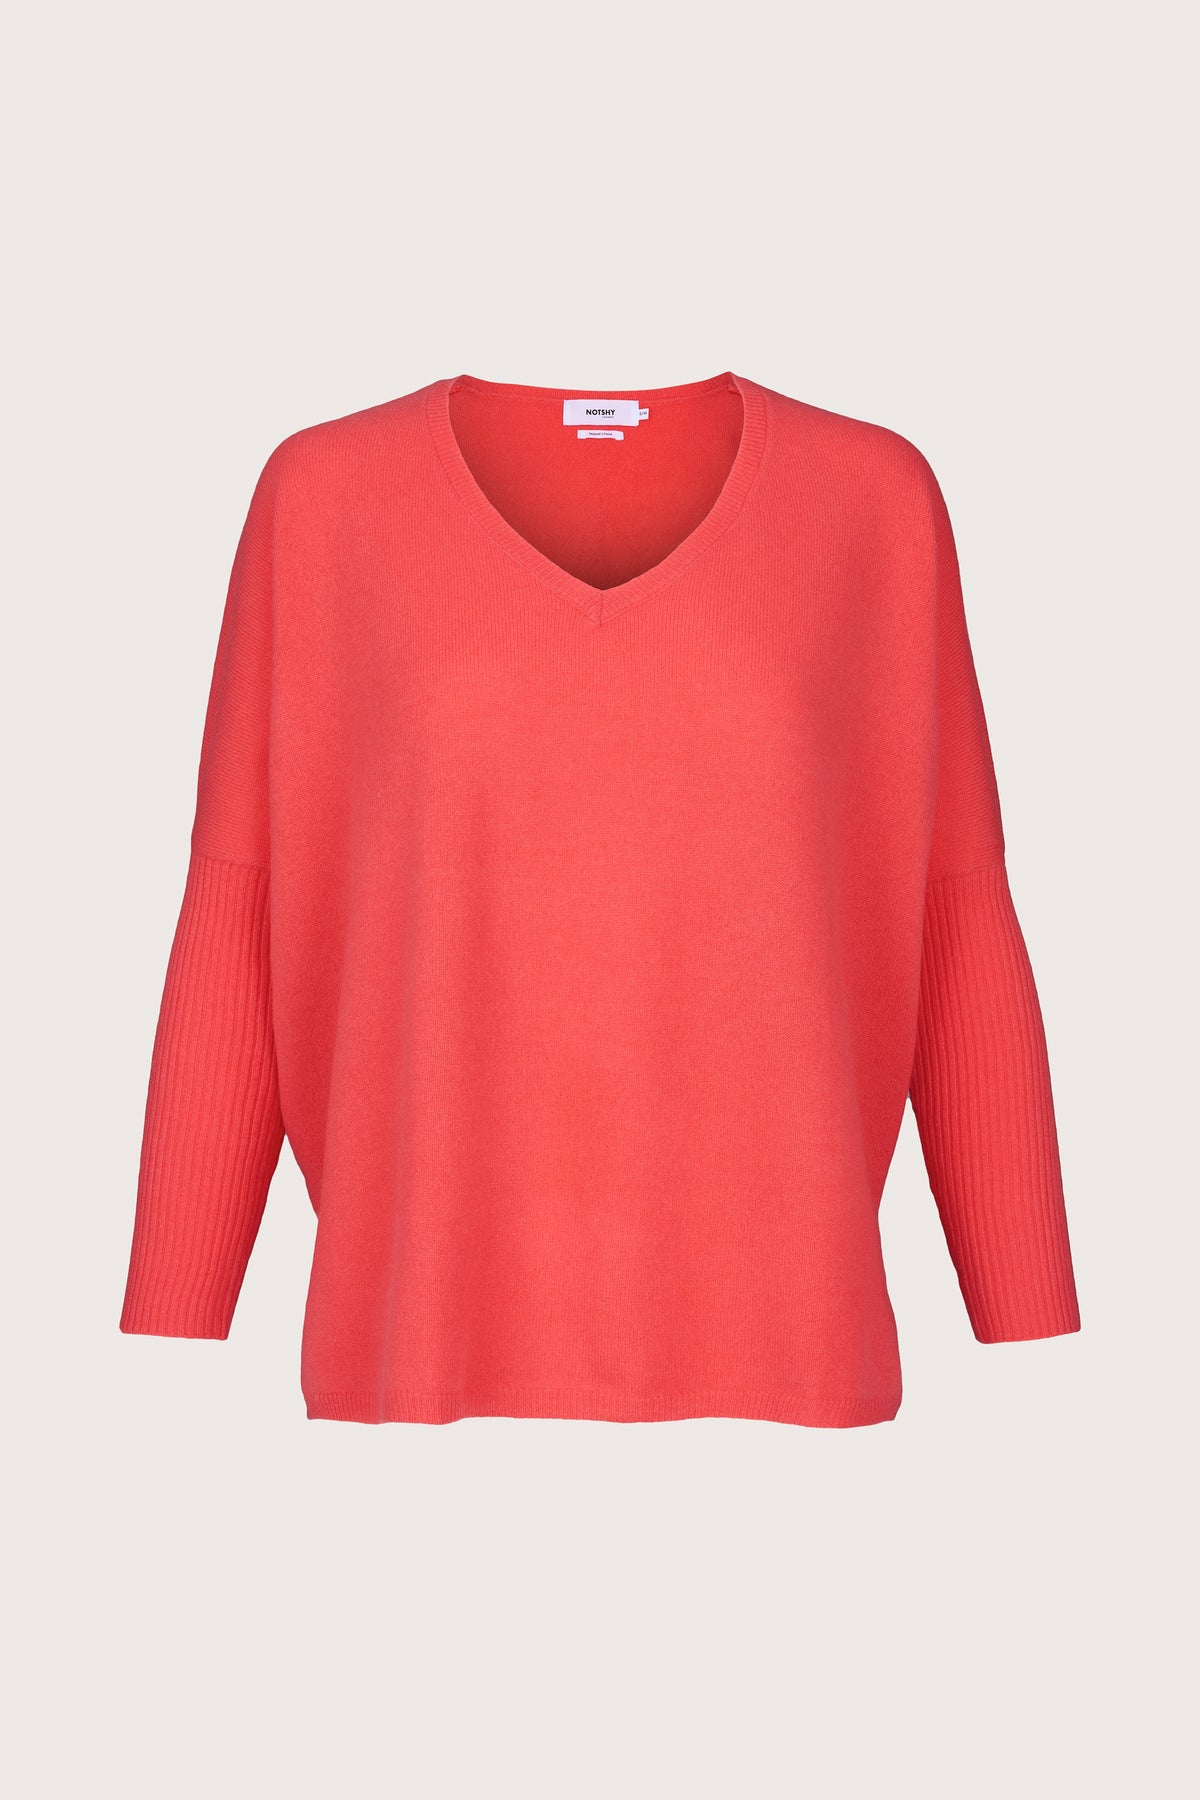 Coral coloured cashmere jumper with a v neck and long rib sleeves